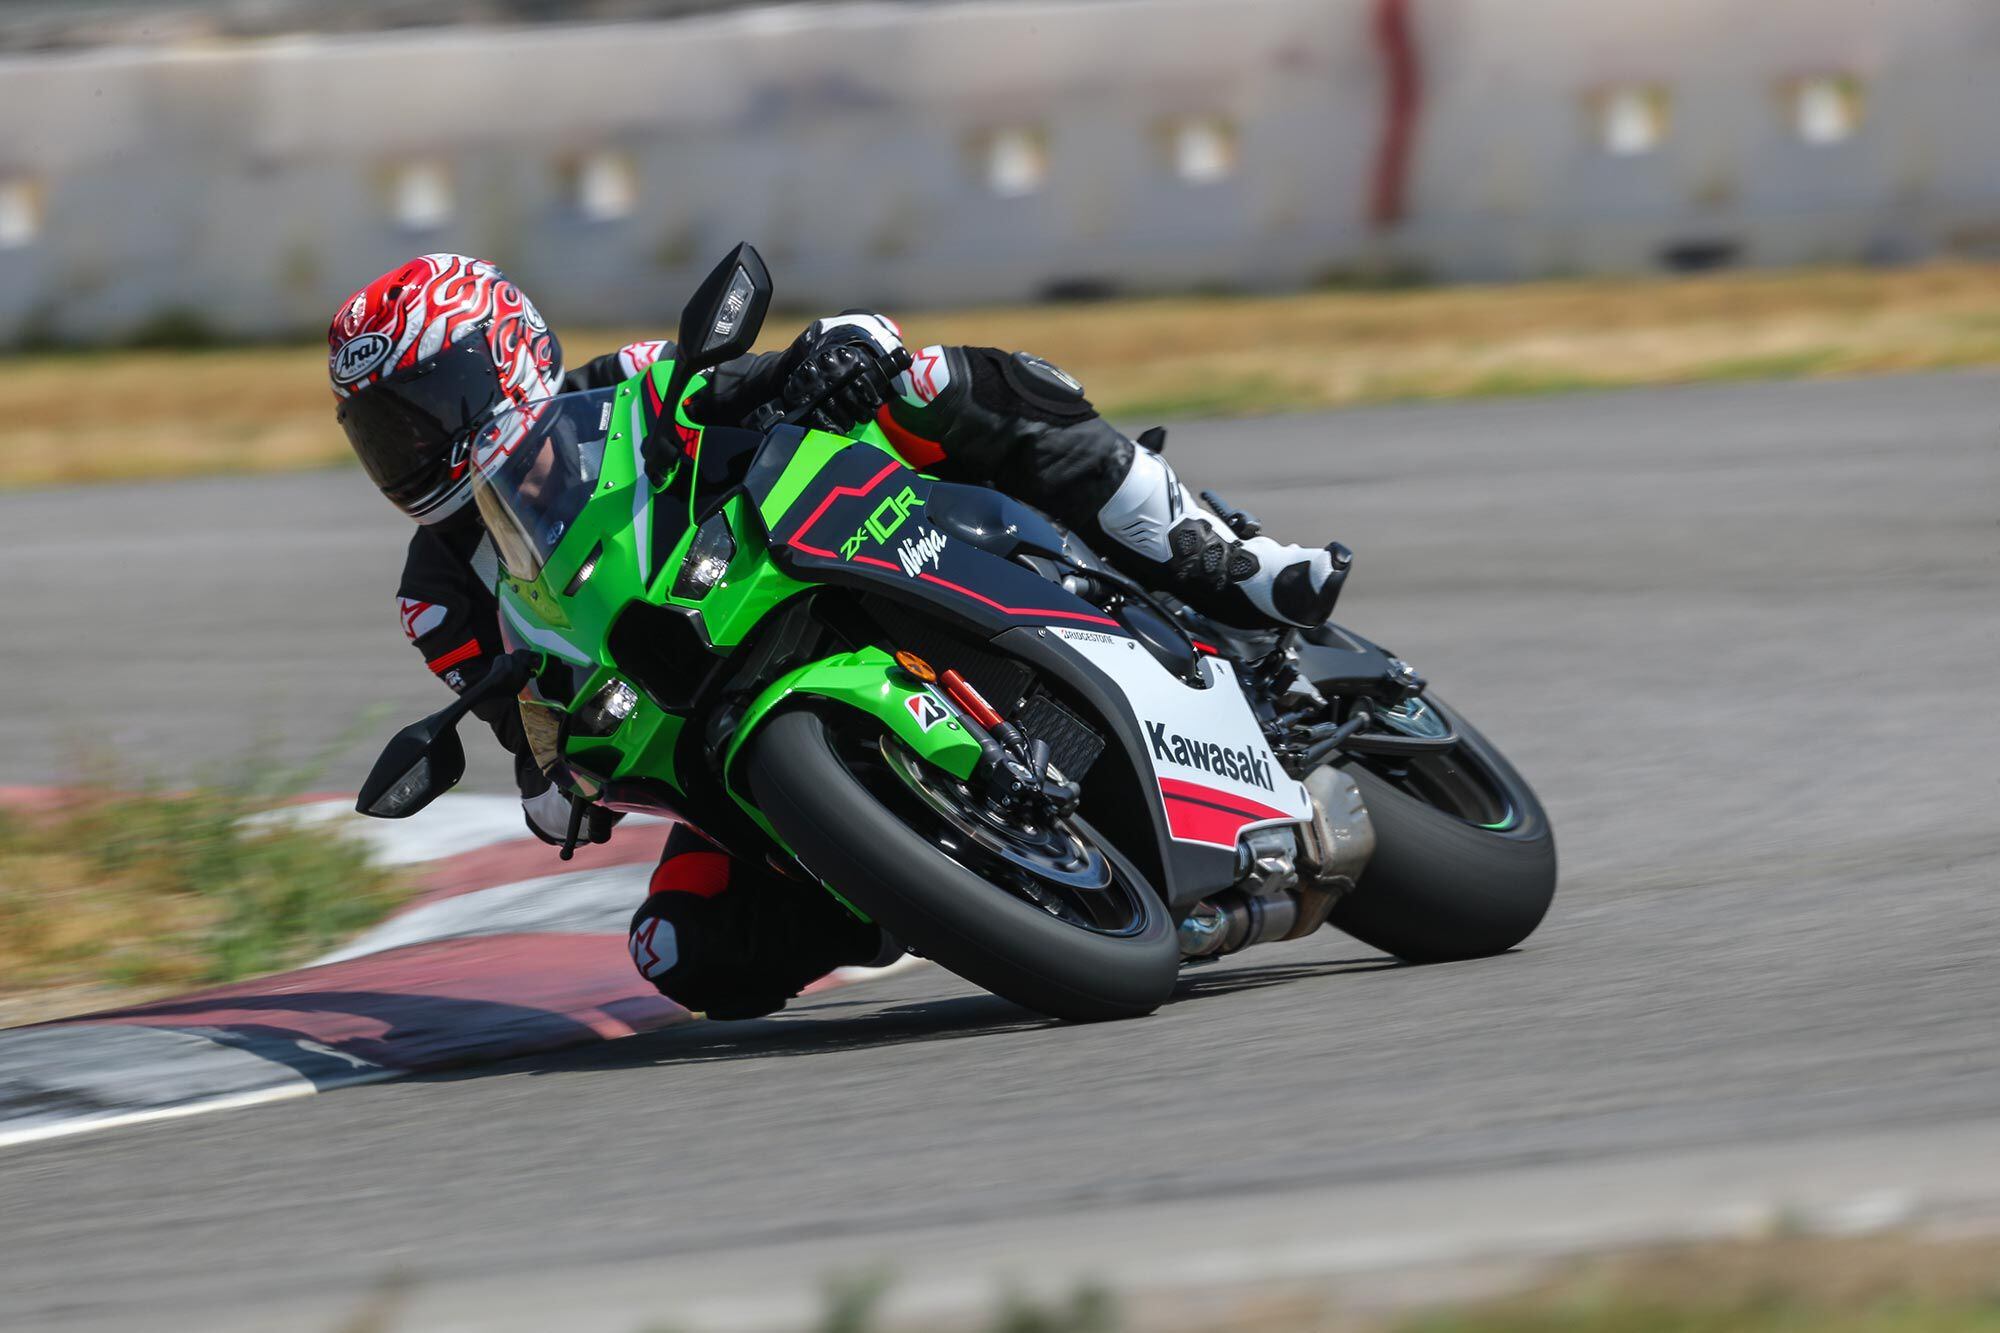 The Ninja ZX-10R smashes corners with a confidence-boosting any-apex, anytime attitude.